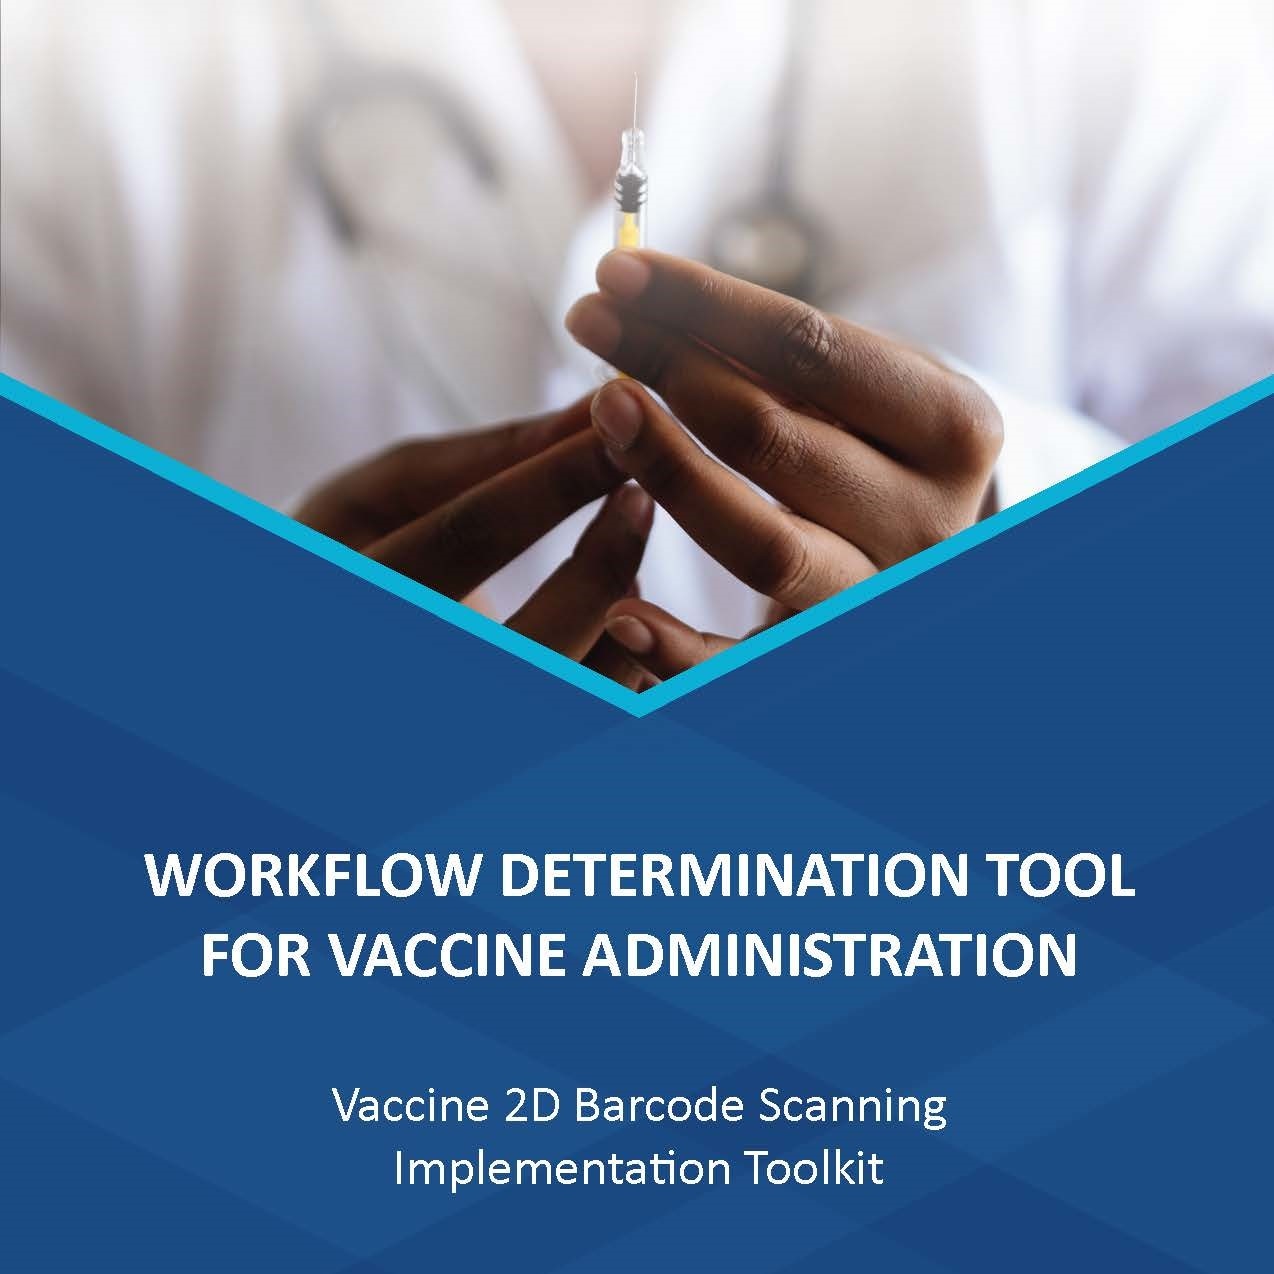 Workflow determination tool for vaccine administration, vaccine 2-dimensional 2d barcode scanning implementation toolkit